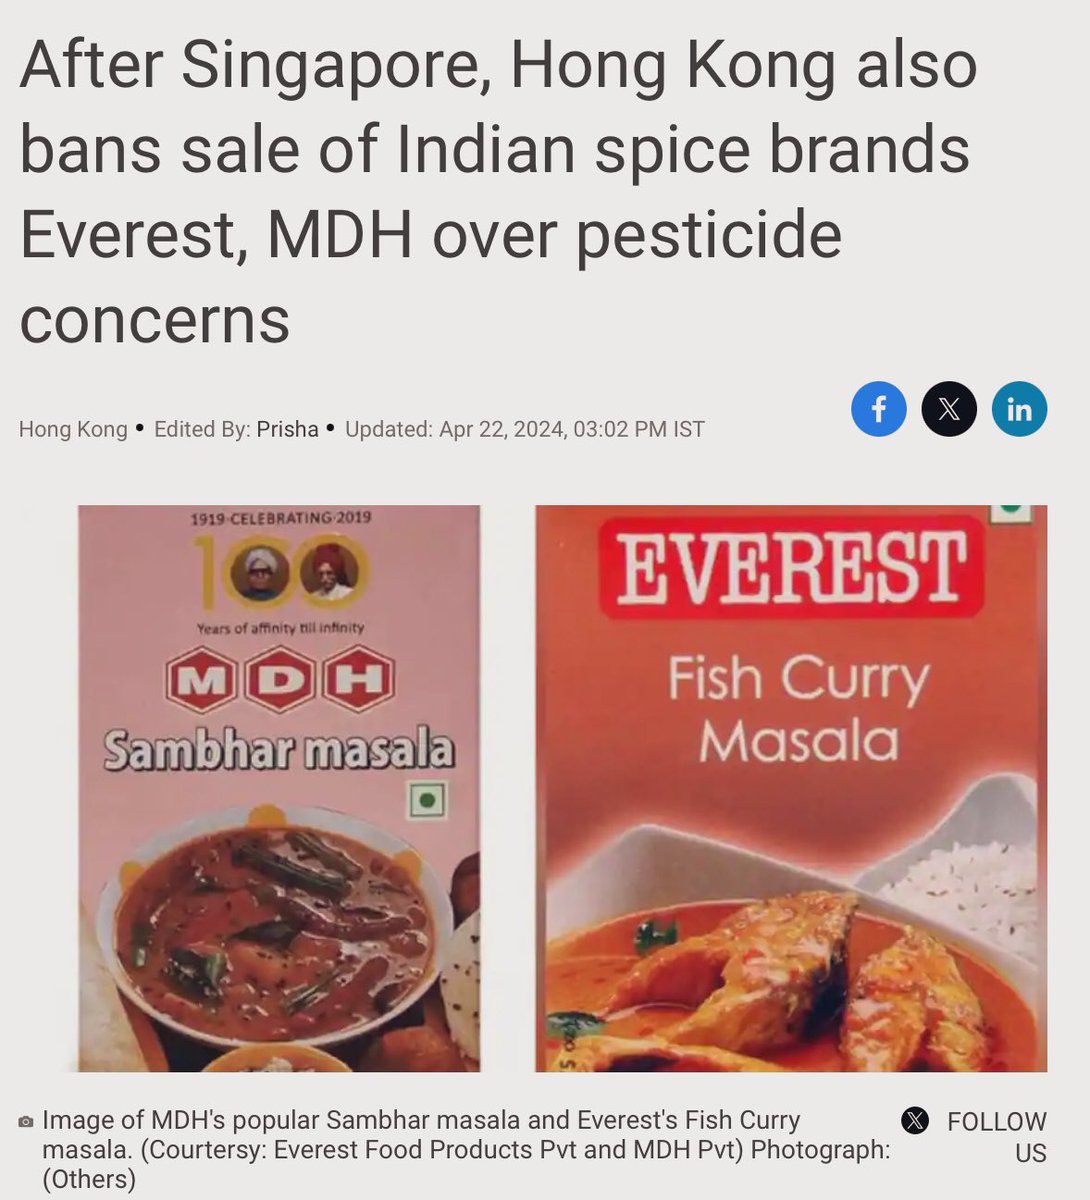 Few days ago concerns were raised by a number of countries regarding high pesticide content in Indian spices. Meanwhile, Indian regulator FSSAI has found an easy solution. Just increase the permissible limit of pesticides by 10 times what was allowed earlier. Problem solved.